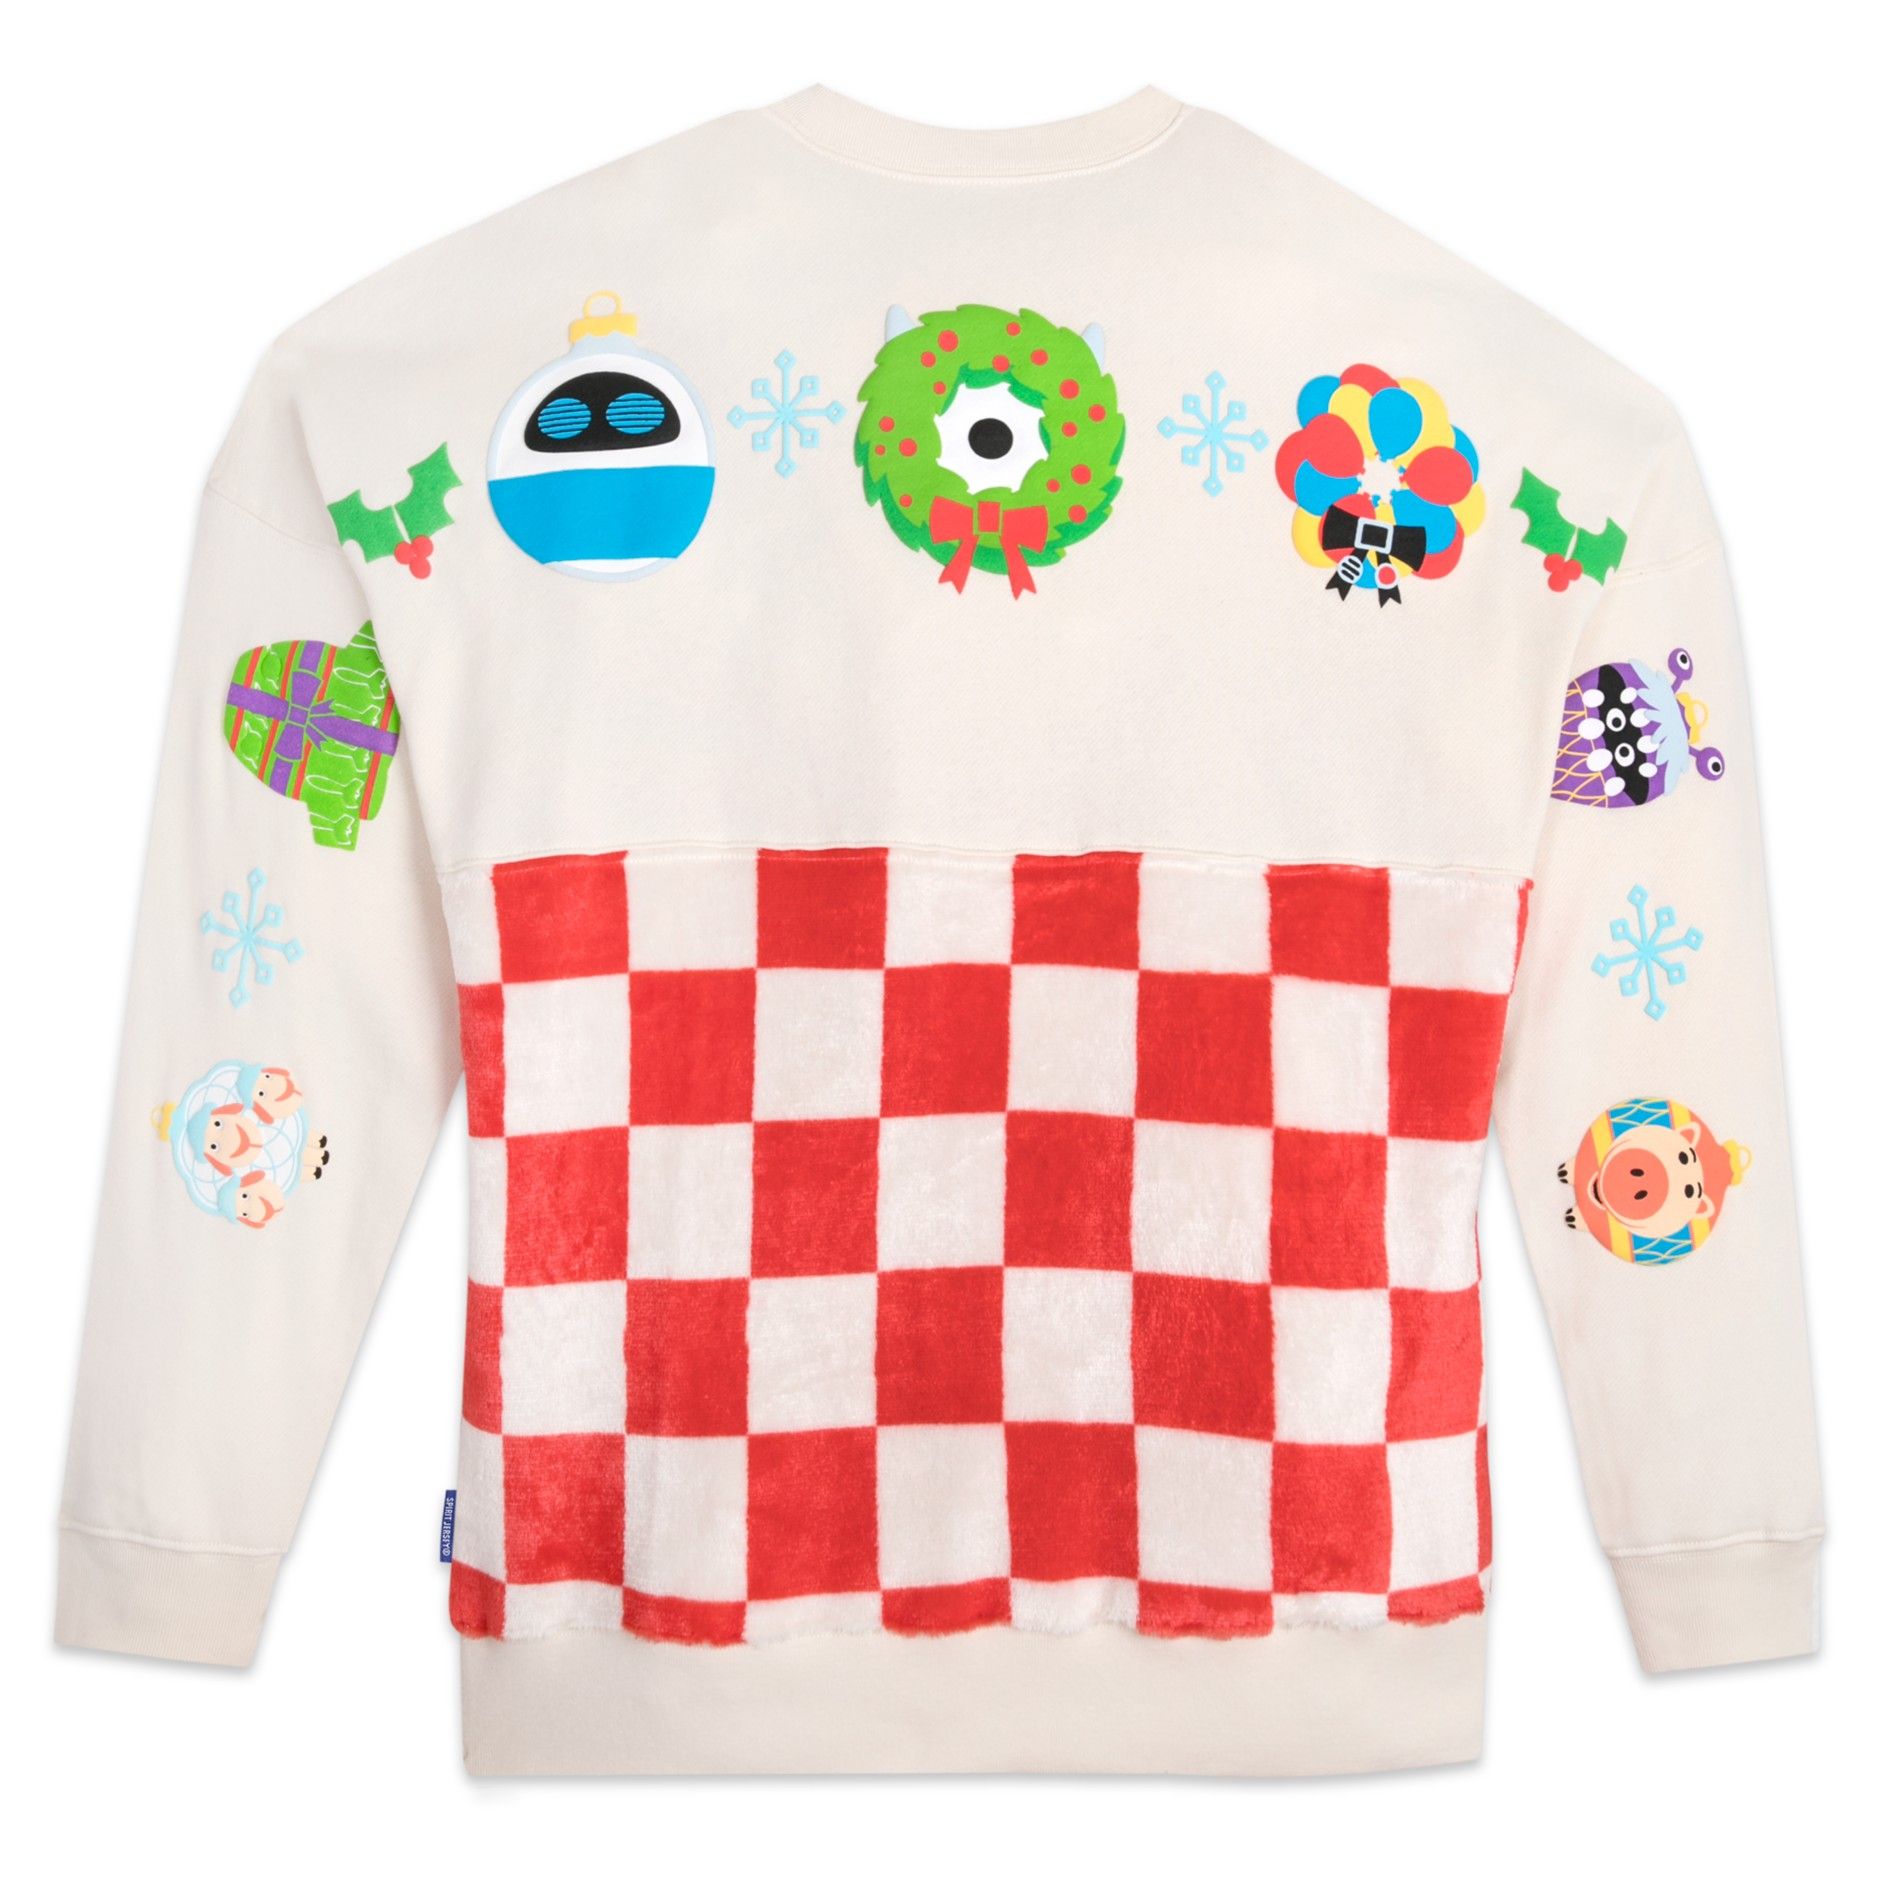 Pixar Holiday Spirit Jersey for Adults | Disney Store